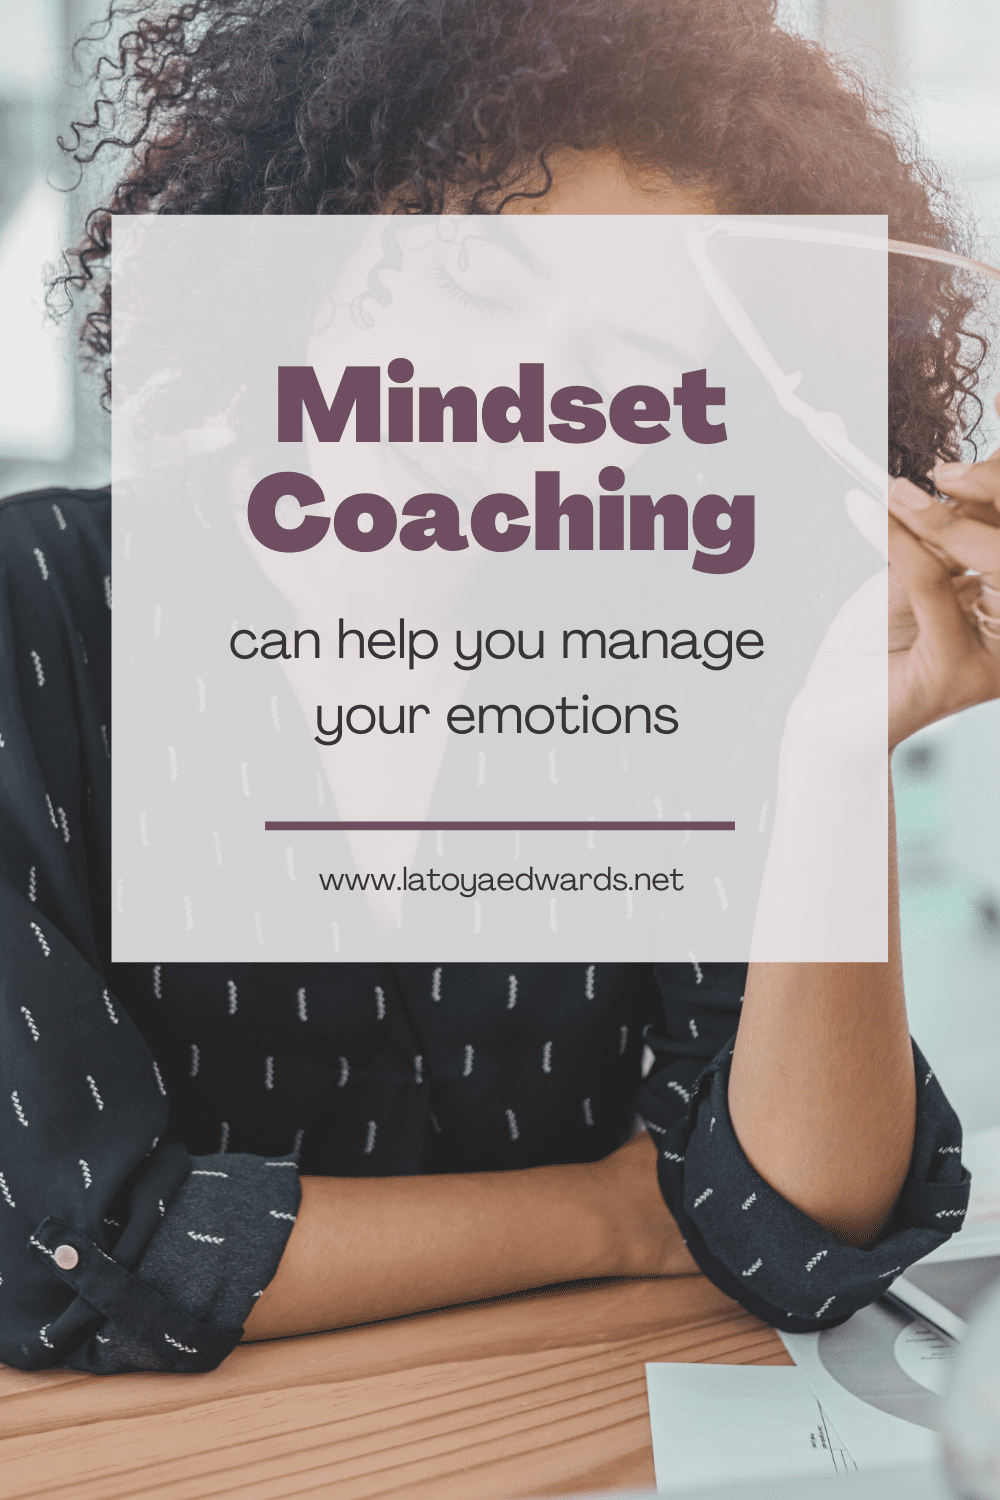 Curious about how mindset coaching works? If you are trying to find ways to manage your emotions coaching might be what you're looking for. With journal-based coaching you can learn how to journal your emotions and thoughts and how to release those emotions. If you're looking for tips on how to feel your feelings without the overwhelm visit the full blog post to read more about my 3 step coaching framework.